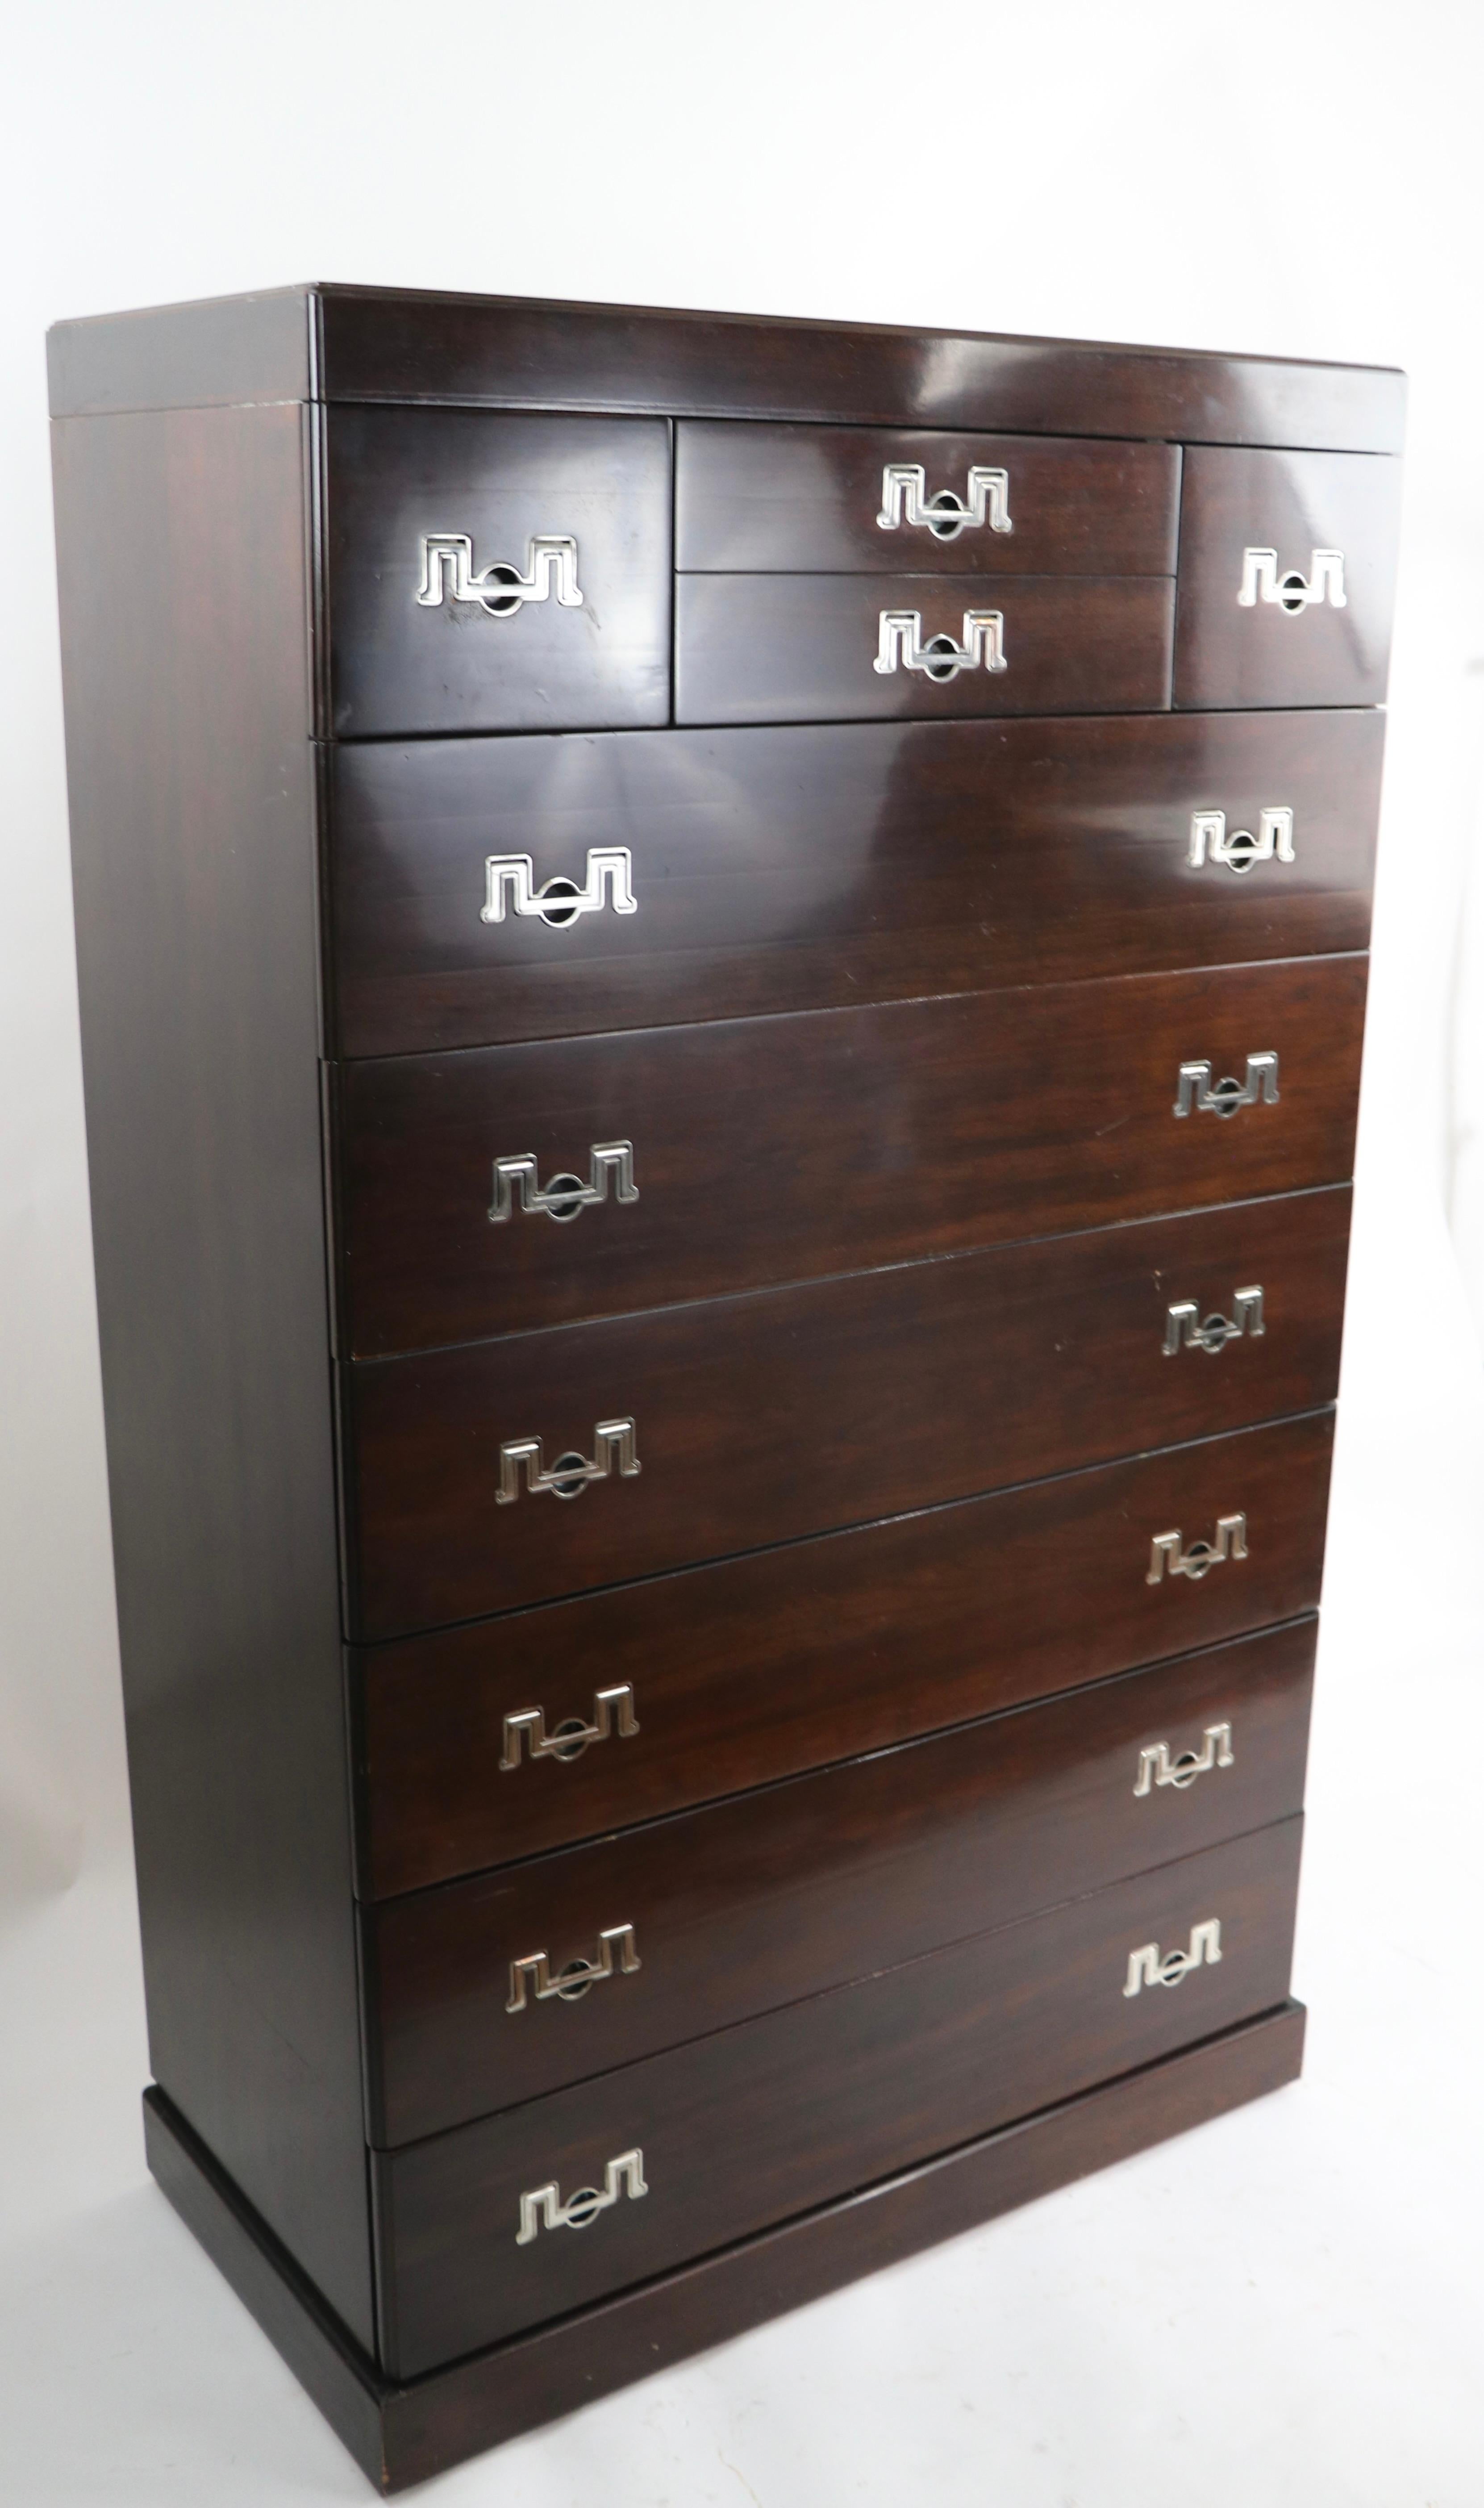 Exceptional and impressive 9 drawer highboy by Henredon, having a dark wood case ( mahogany or walnut we believe ) with stylized bright chrome bale handle pulls. The chest features three drawers across the top over (6) drawers. This example is in